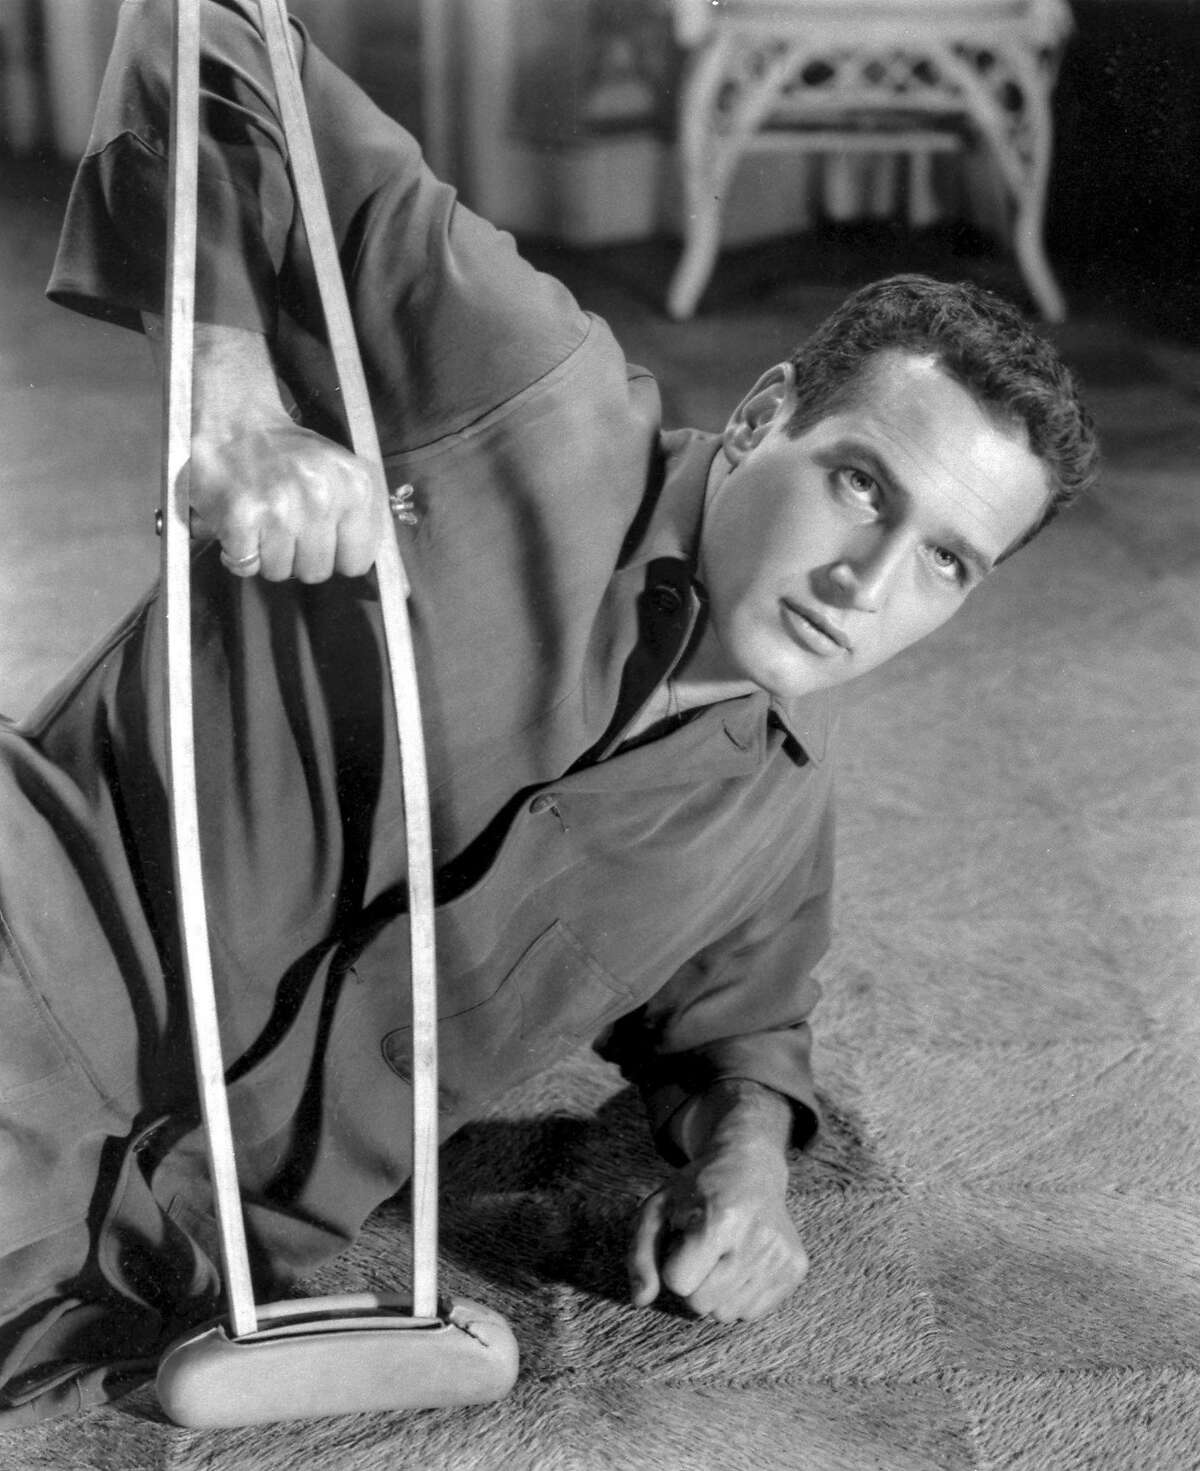 In this 1959 file photo originally released by MGM pictures, actor Paul Newman appears as the character Brick Pollitt in the film version of Tennessee William's Pulitzer Prize-winning play ''Cat on a Hot Tin Roof.'' Newman, the Academy-Award winning superstar who personified cool as an activist, race car driver, popcorn impresario and the anti-hero of such films as "Hud," "Cool Hand Luke" and "The Color of Money," has died, a spokeswoman said Saturday. He was 83. Newman died Friday, Sept. 26, 2008, of cancer, spokeswoman Marni Tomljanovic said. (AP Photo/MGM) ** NO SALES **